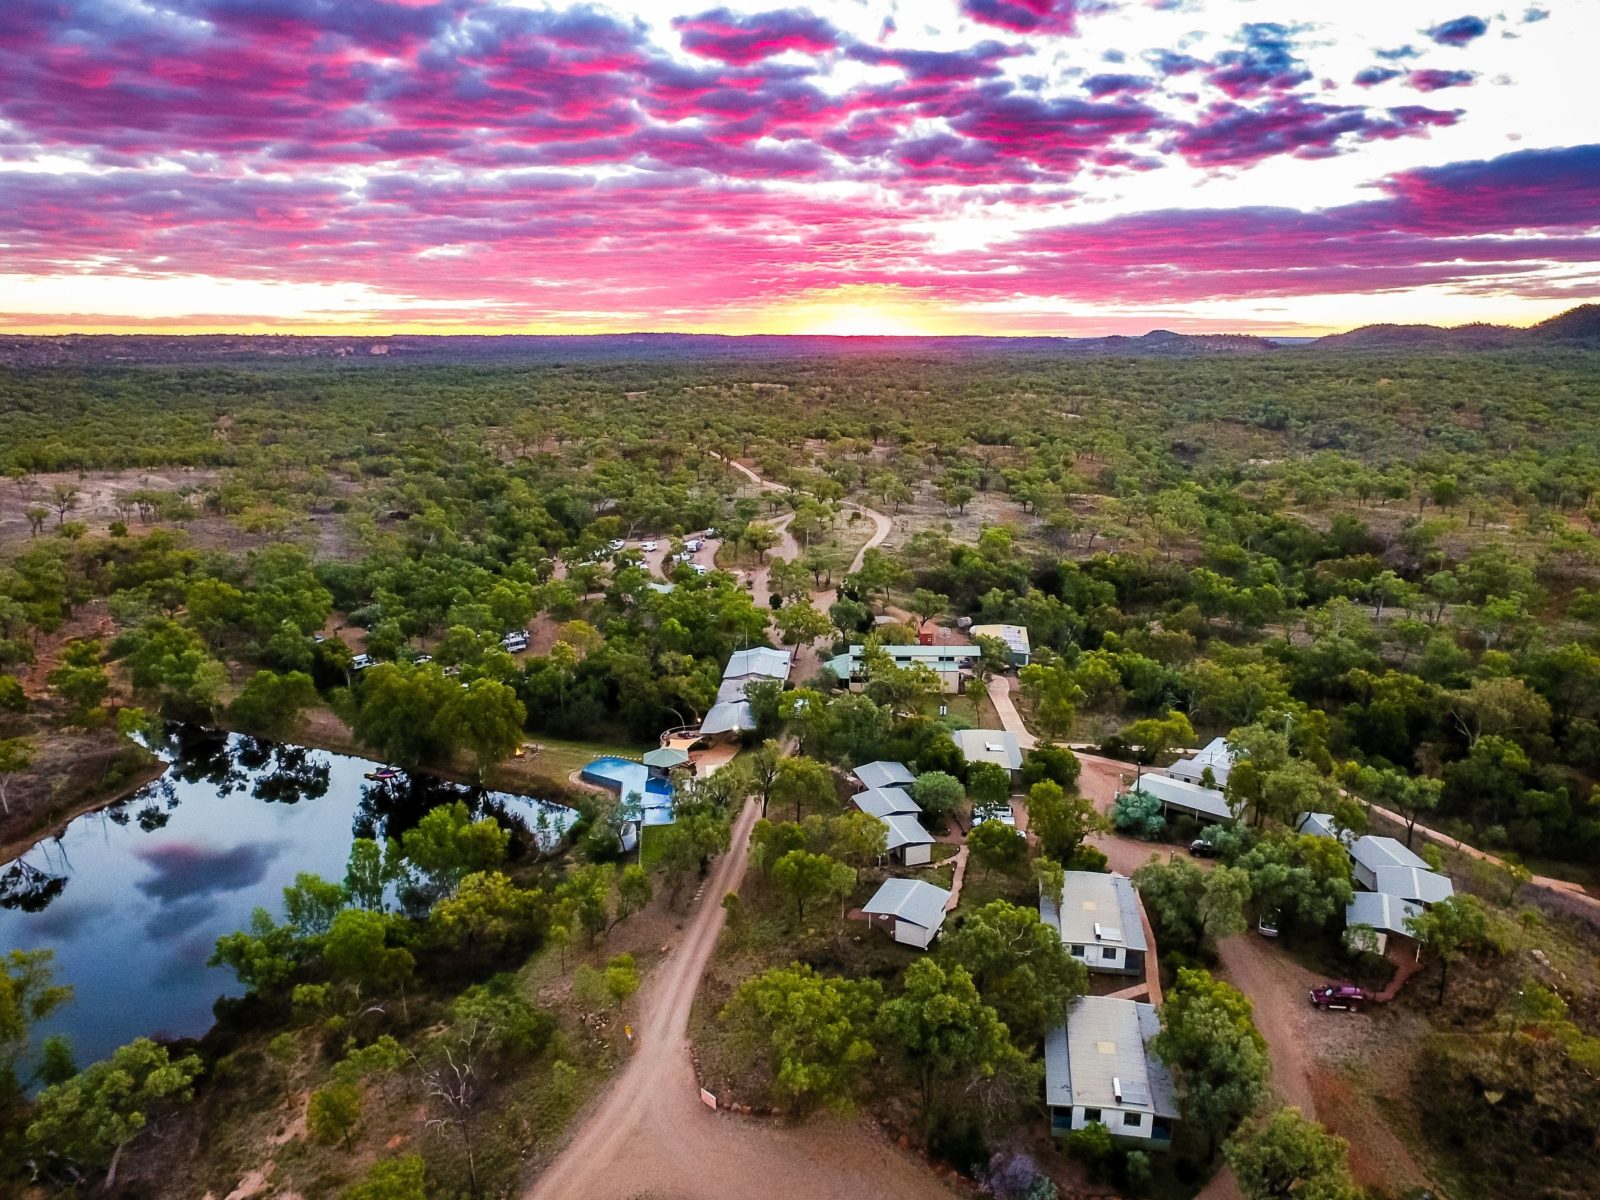 Sunset at Cobbold Gorge from above